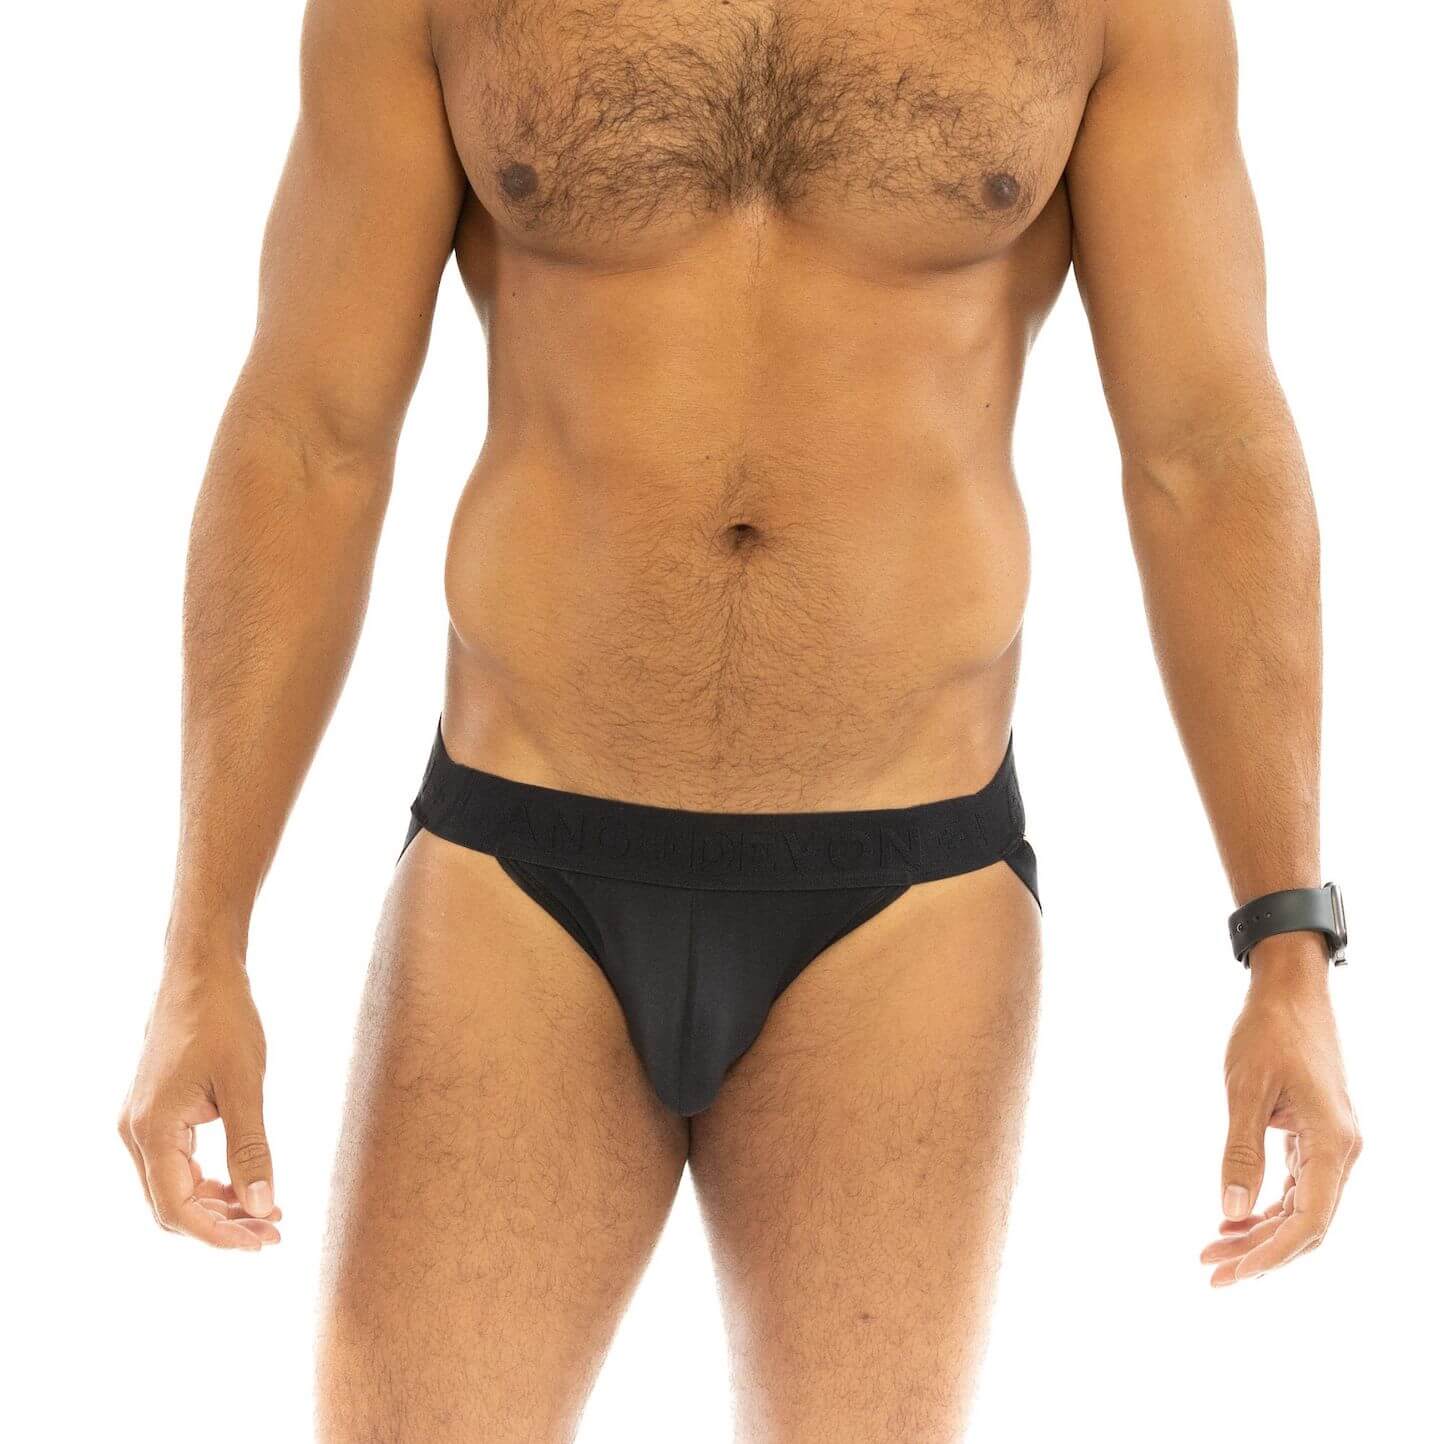 Leather Jockstraps: Combining Style and Comfort